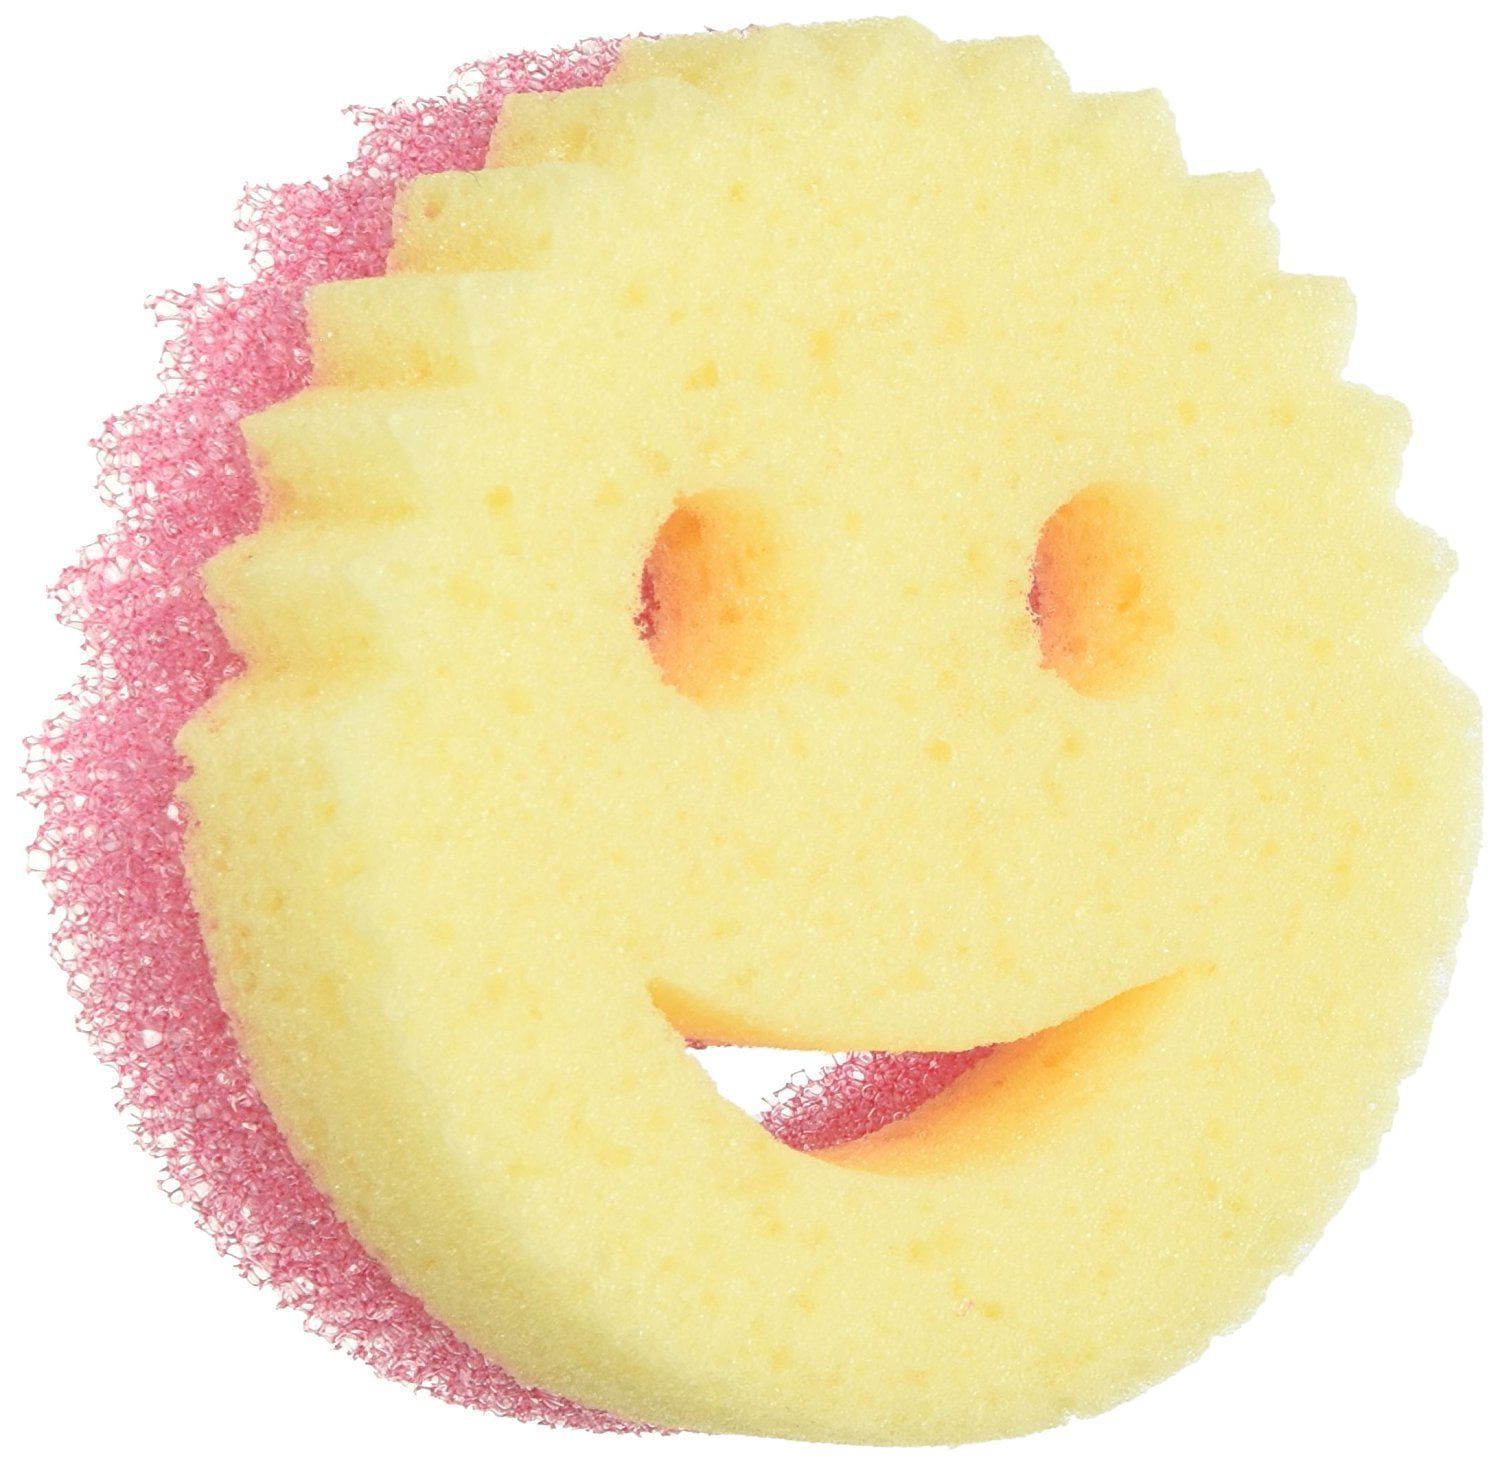 I love the sponge daddy and the pink stuff! : r/QualityofLifeItems